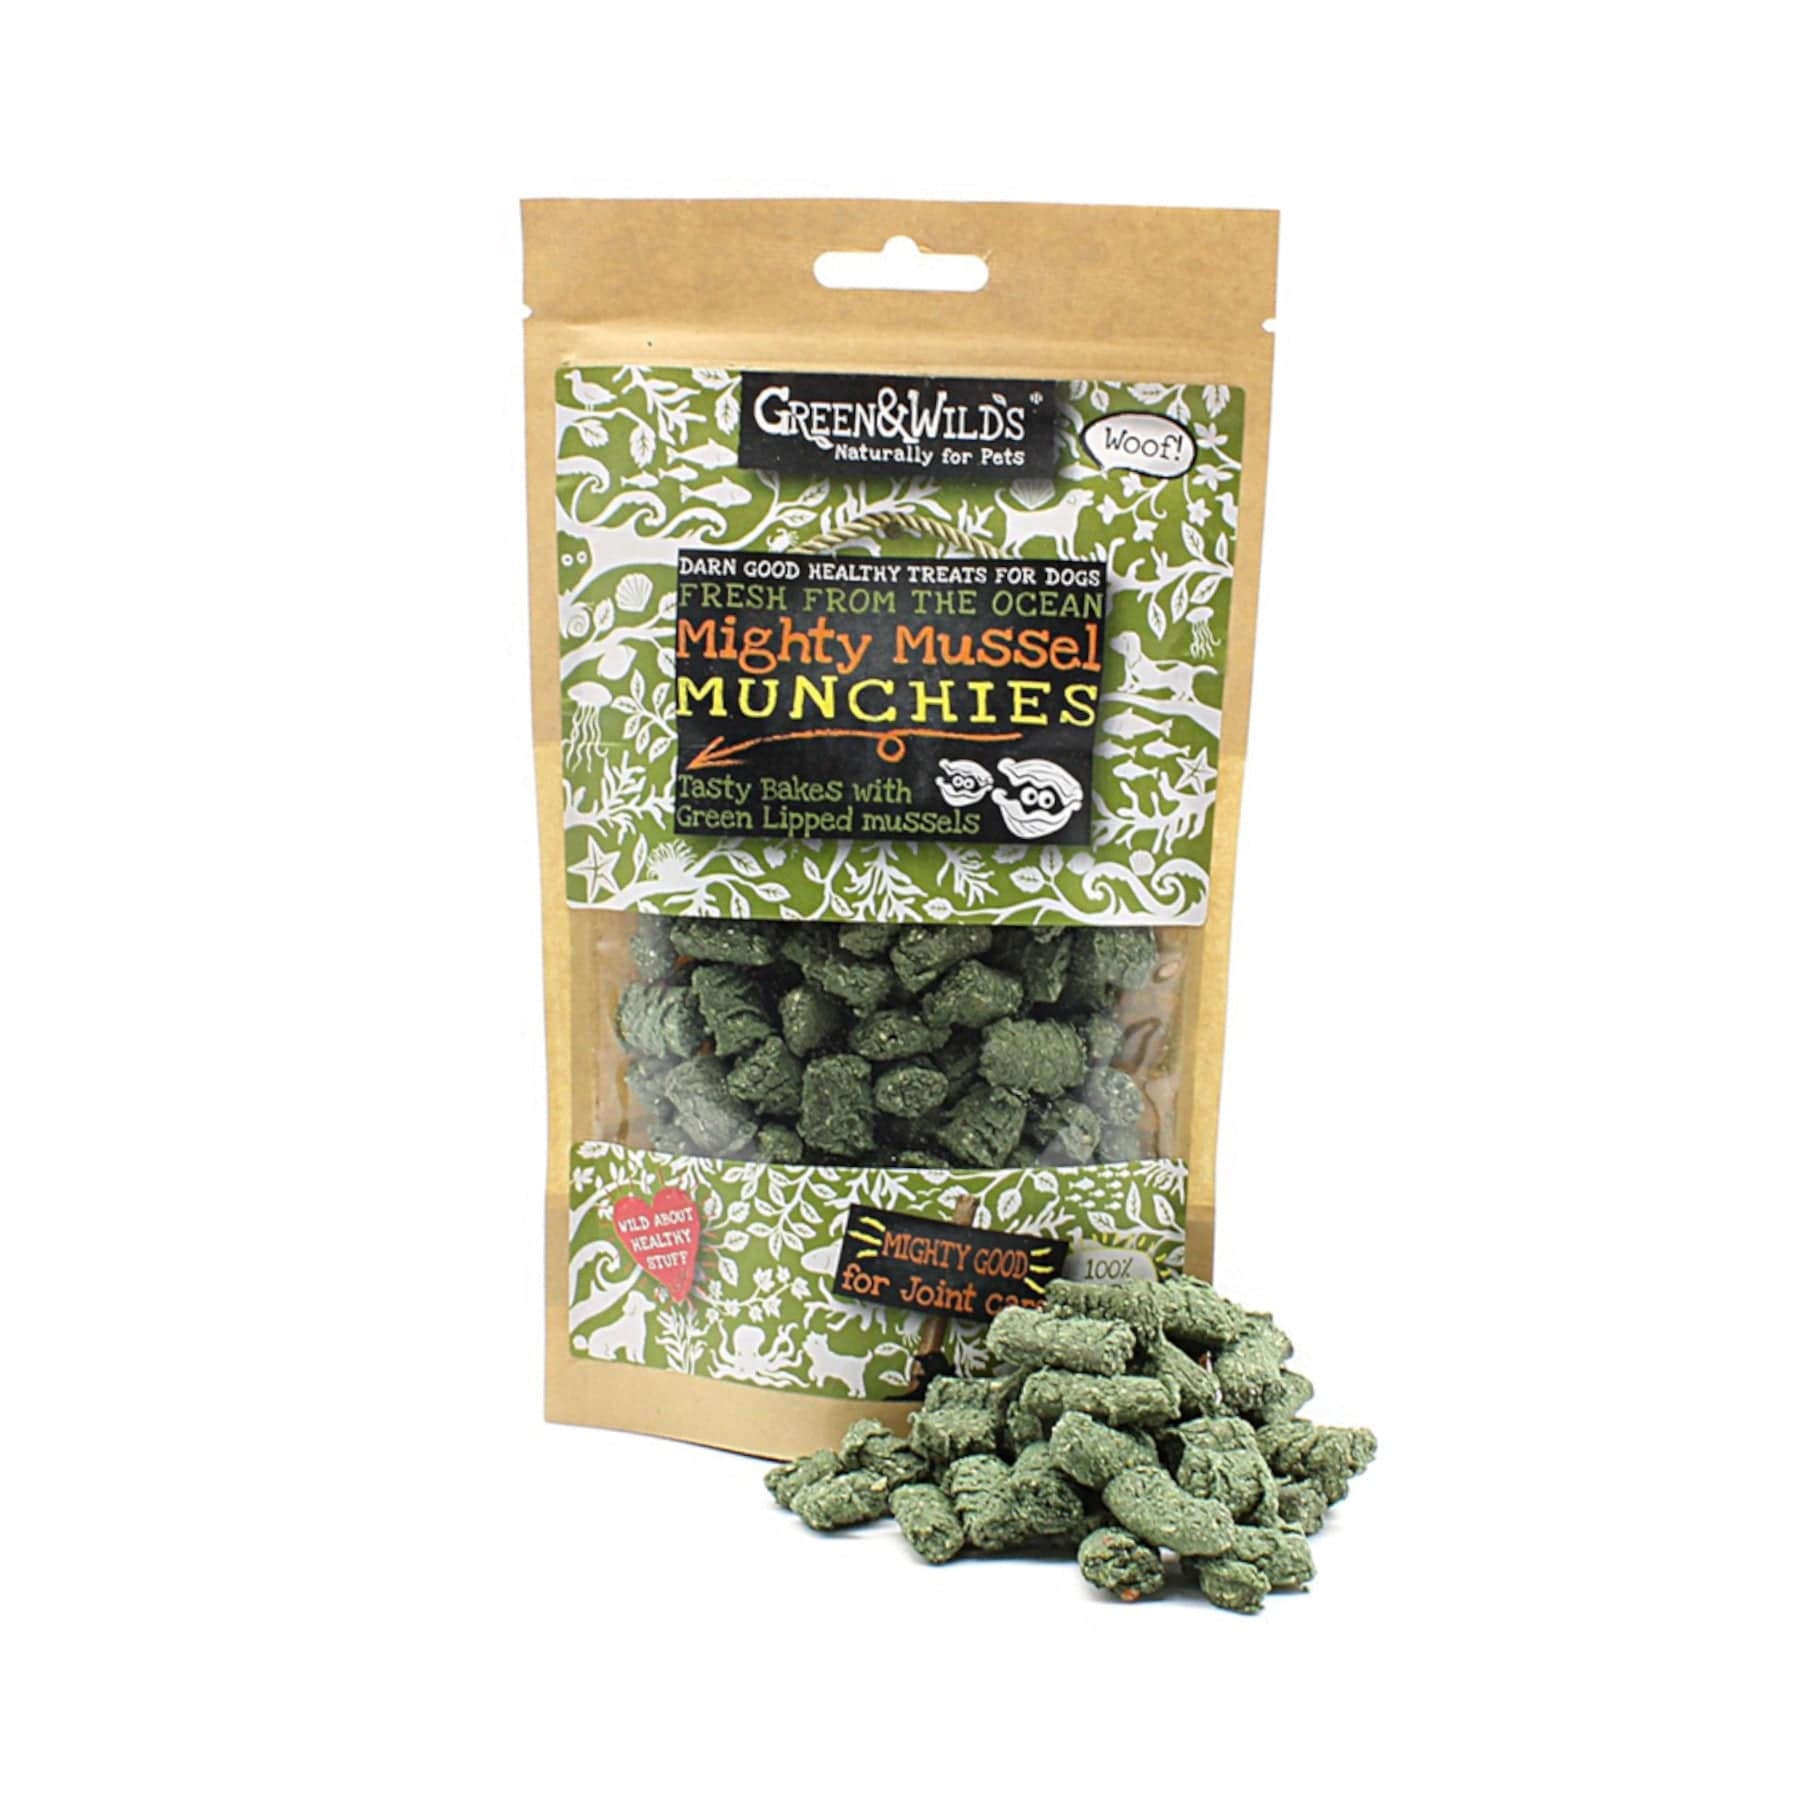 Green & Wild's Mighty Mussel Munchies dog treats packaging with healthy natural snacks for pets, green-lipped mussels bites for joint care displayed in front of the bag.